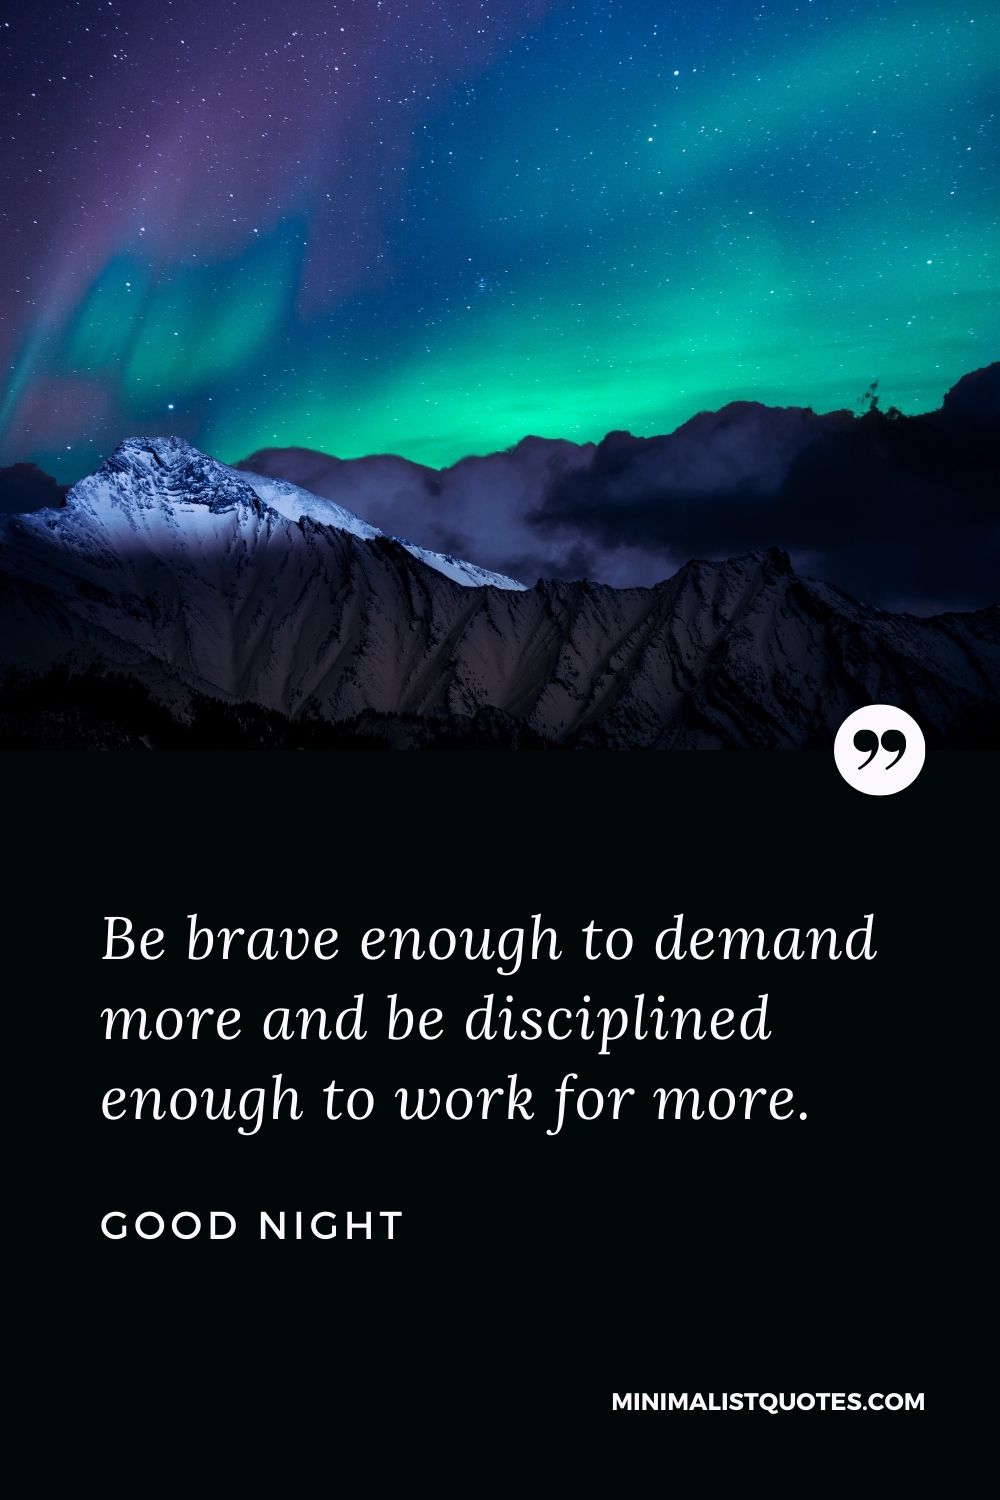 Good Night Wishes - Be brave enough to demand more and be disciplined enough to work for more.